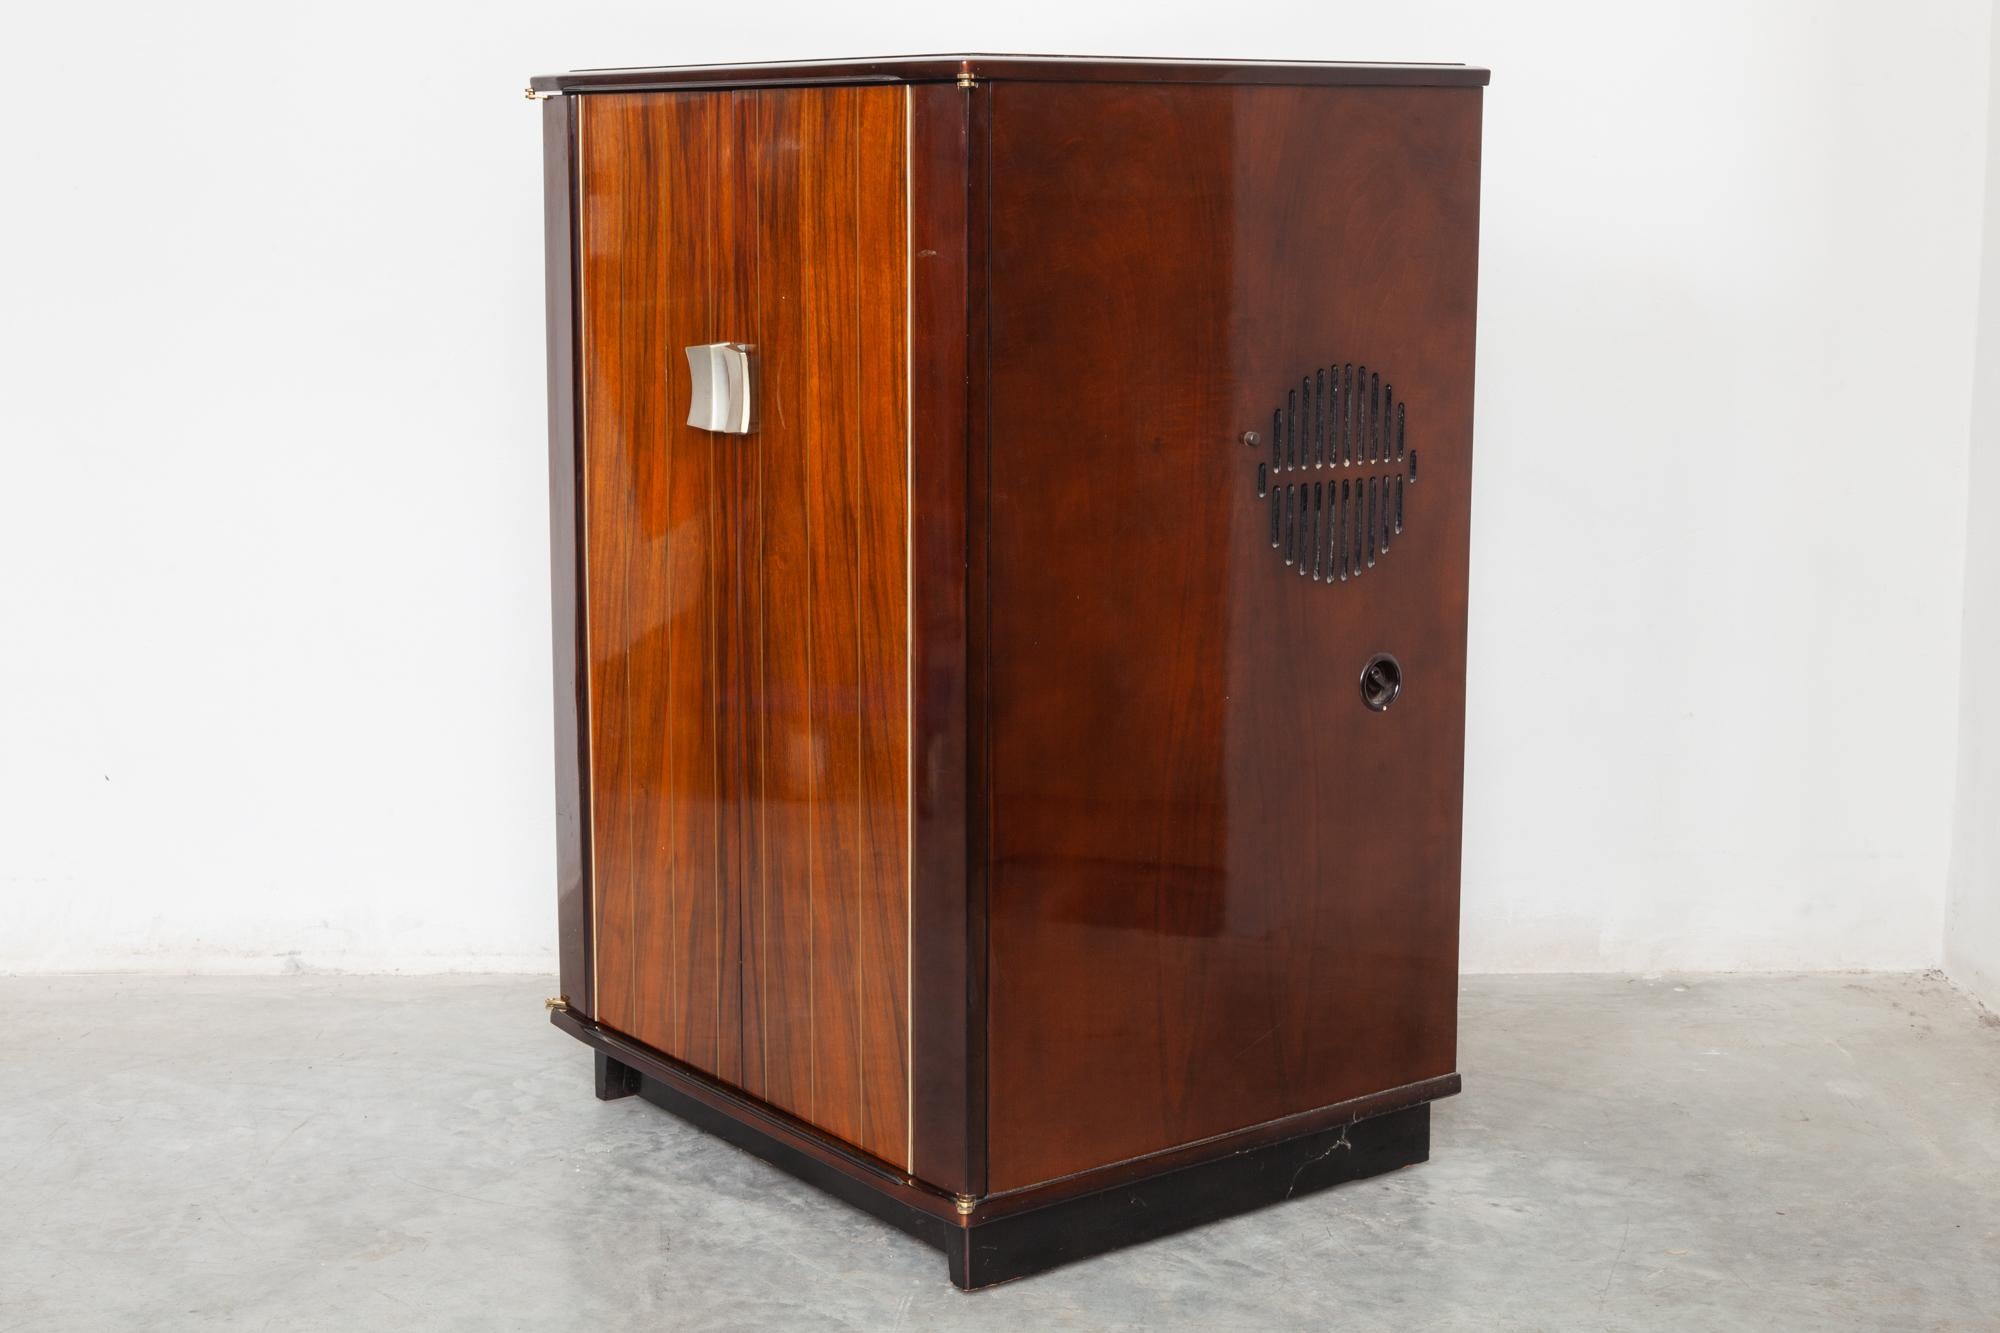 Original 1958 TV cabinet designed by Philips

Vintage midcentury cabinet with television and Radio by Phillips. The fantastic design of glossy wood doors that open to reveal a pristine gold details the furniture is designed by DeCoene.
Complete